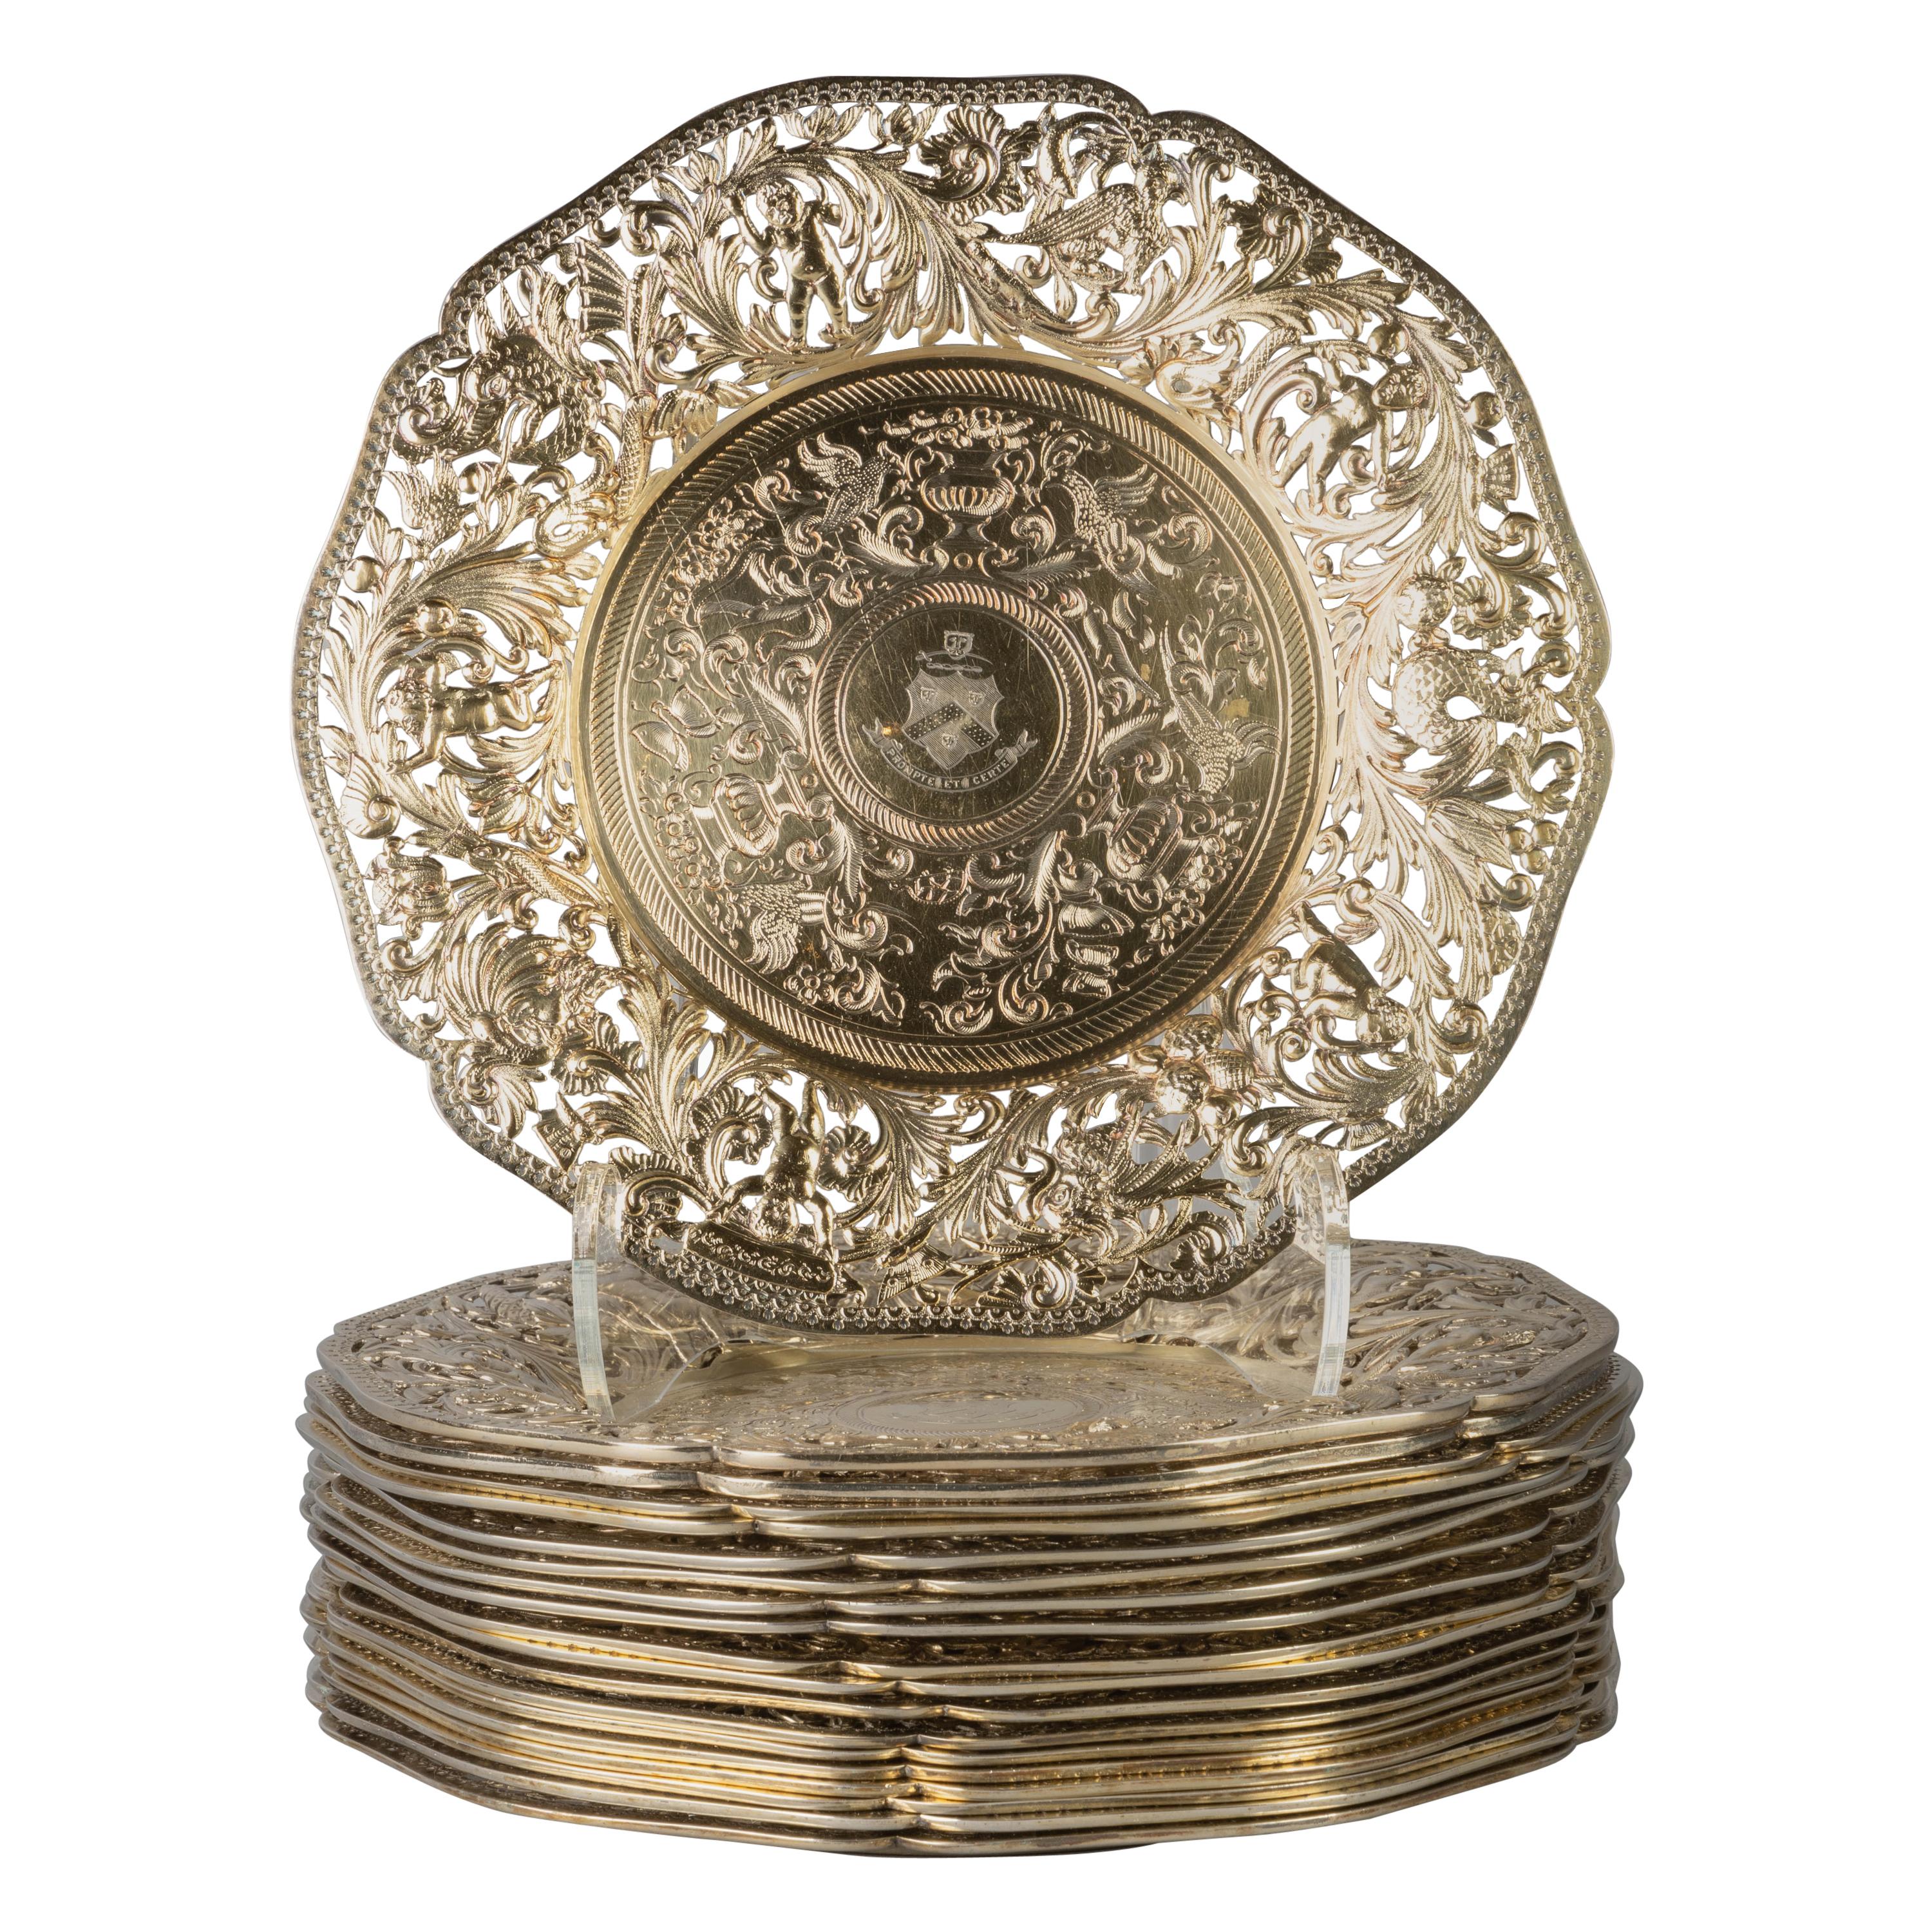 Assembled Set of 19 Open-Work Silver Gilt Plates, circa 1880 For Sale